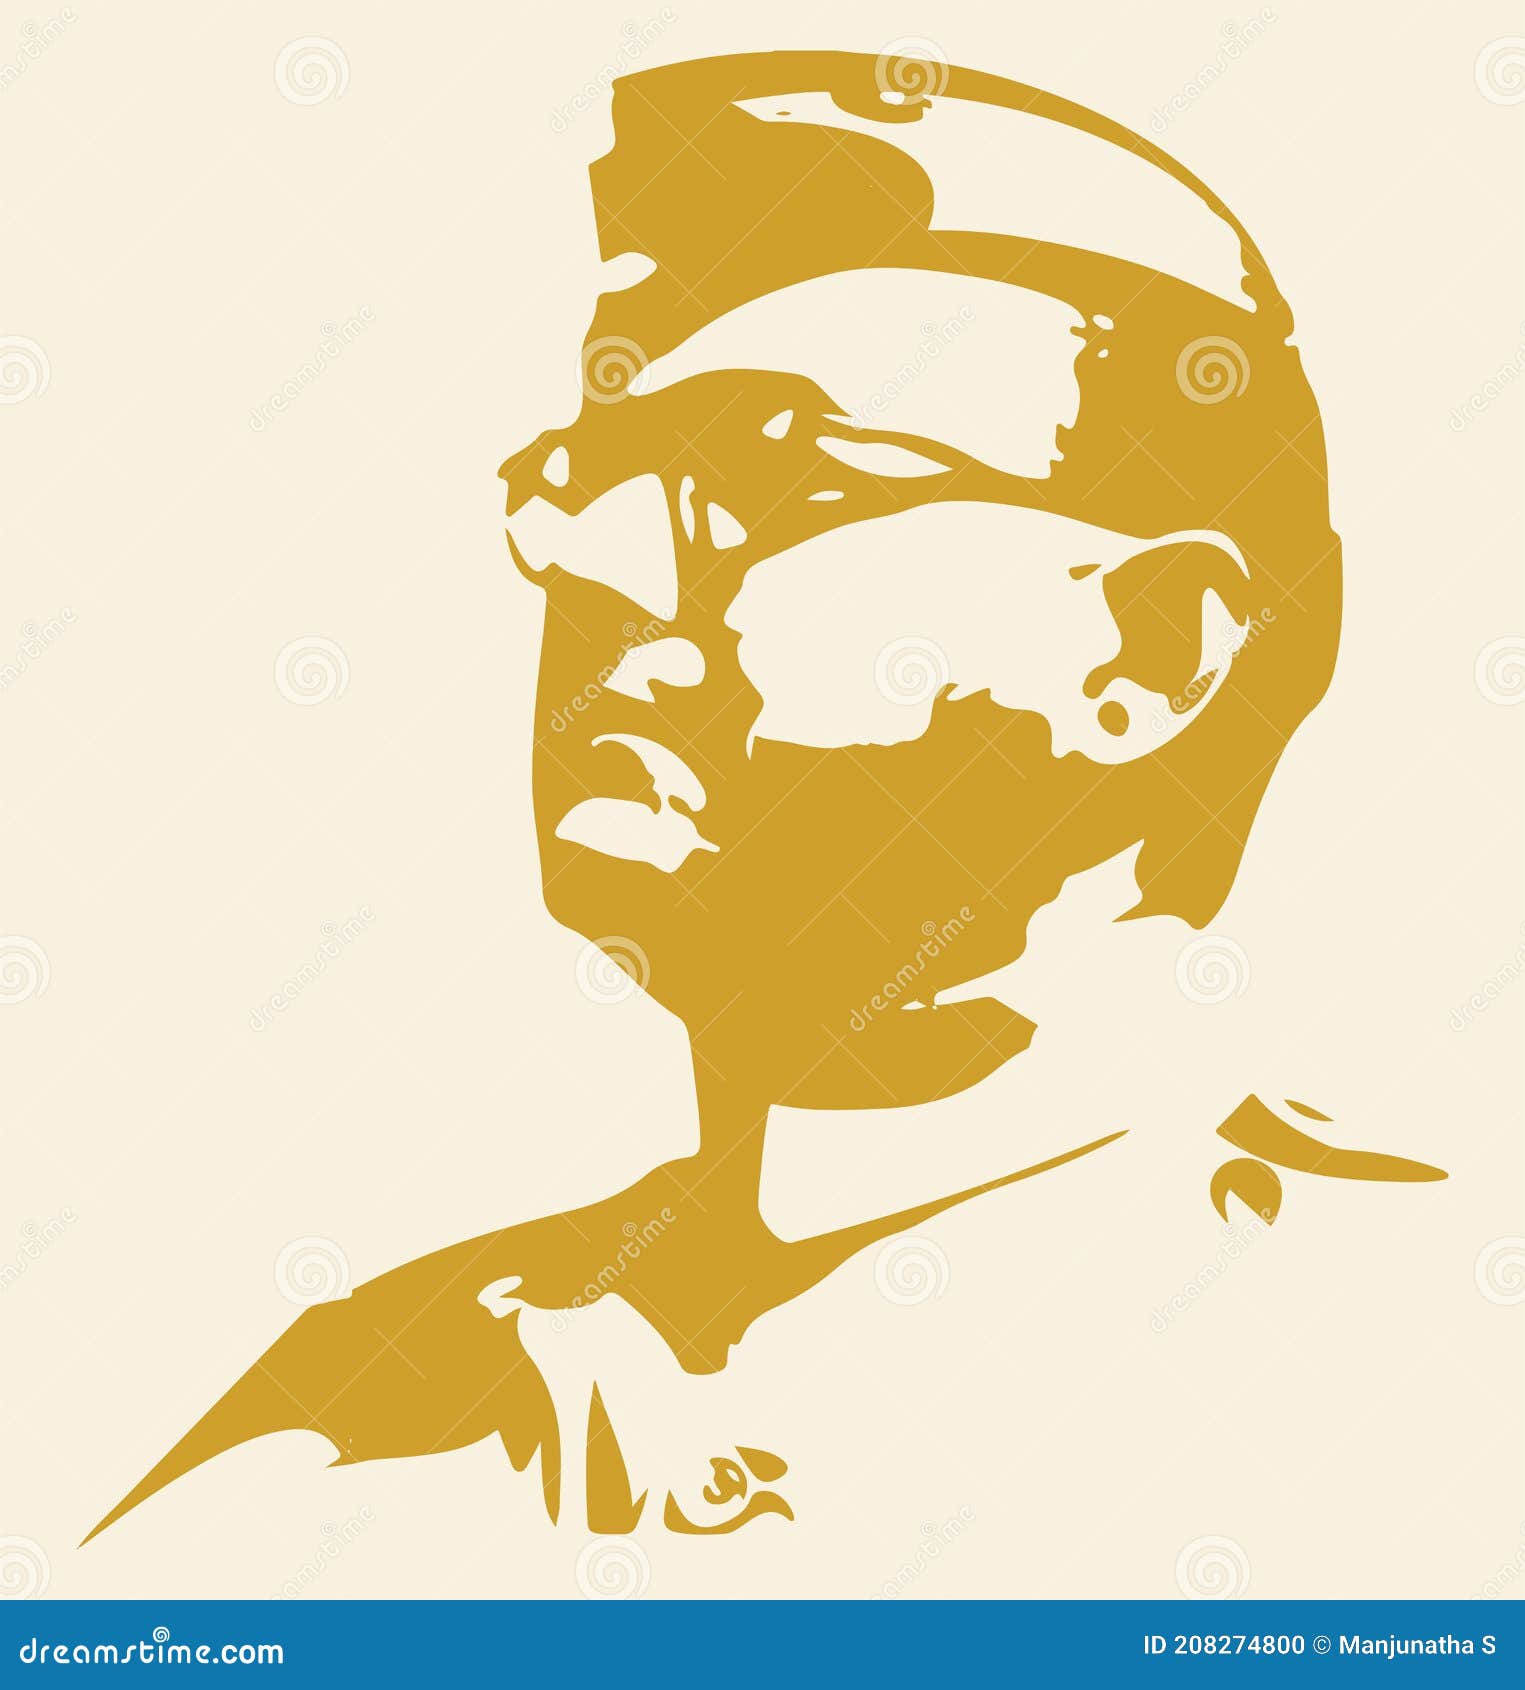 TenorArts Netaji Subhas Chandra Bose Portrait Laminated Poster Framed  Paintings with Matt Black Frame (12inches x 9inches) : Buy Online at Best  Price in KSA - Souq is now Amazon.sa: Home